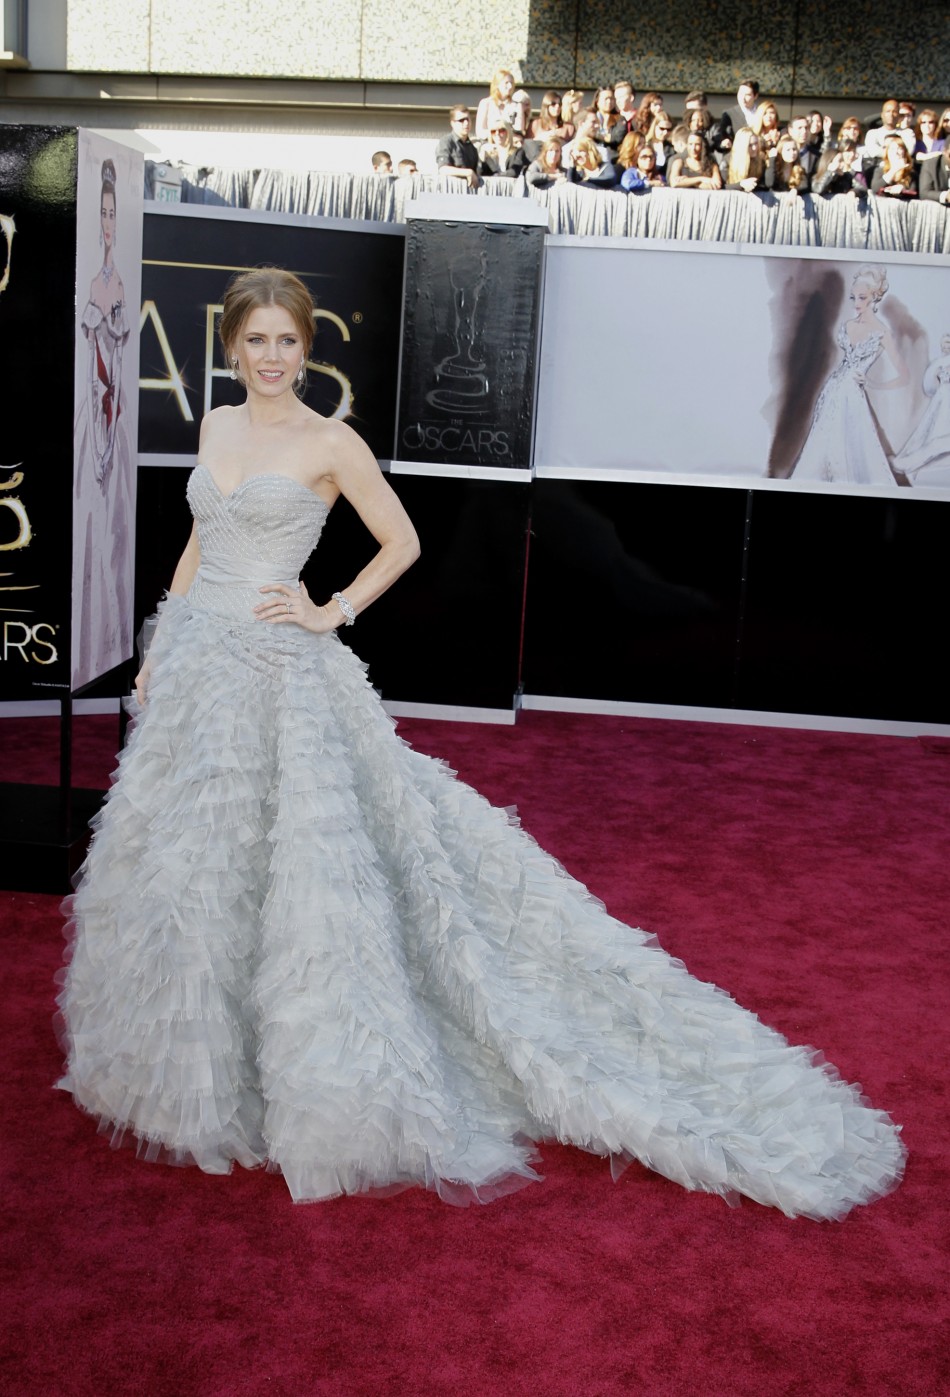 Amy Adams, best supporting actress nominee for her role in The Master, arrives at the 85th Academy Awards in Hollywood, California February 24, 2013.